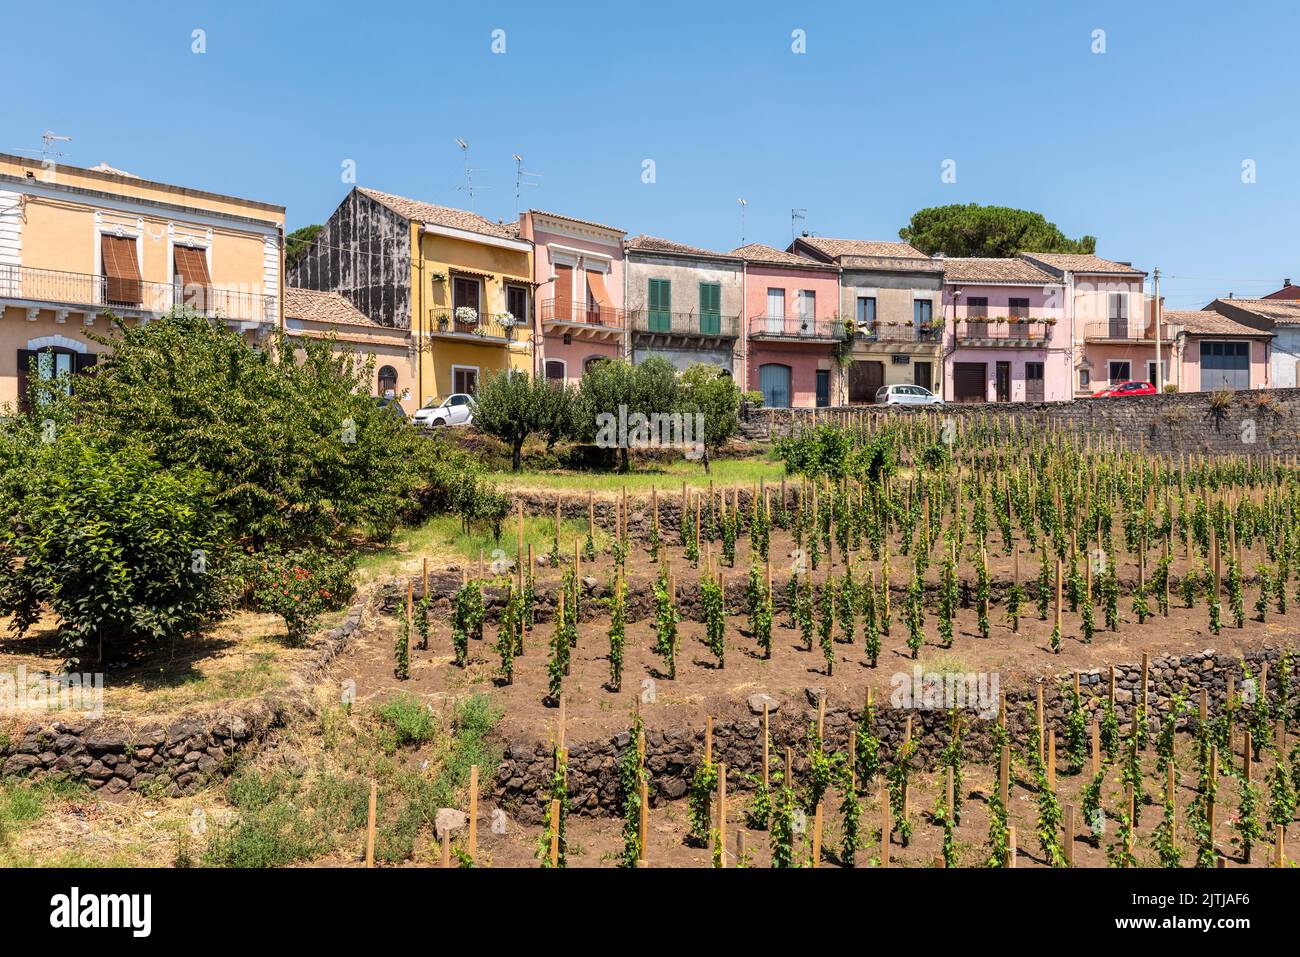 A vineyard in the Sicilian village of Milo, high on the slopes of Mount Etna, where the soil is unusually fertile because of volcanic ash deposits Stock Photo